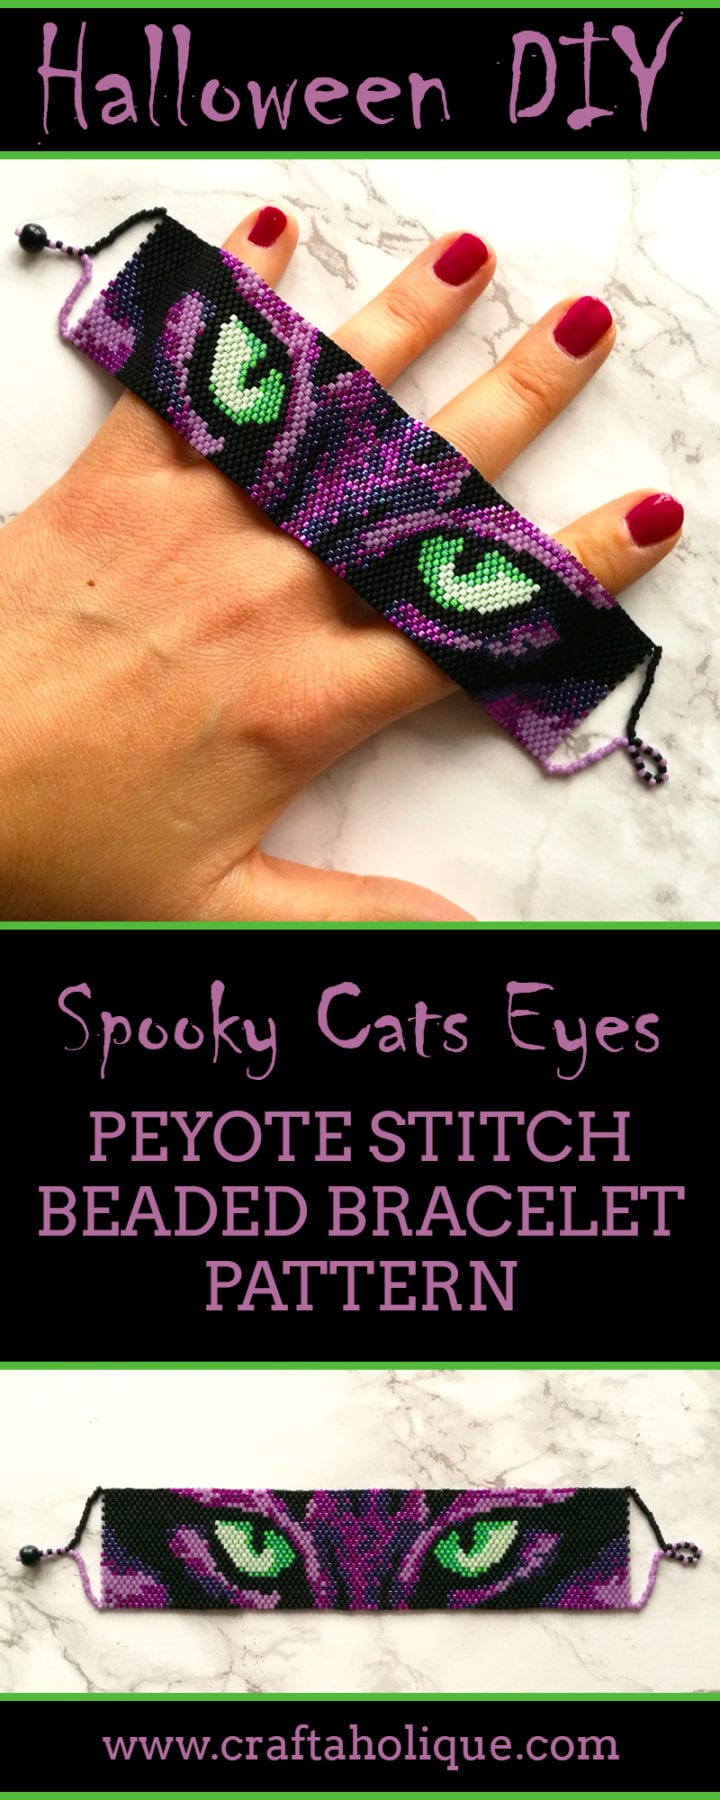 Halloween Beading - Spooky Cats Eyes Peyote Stitch Pattern by Craftaholique